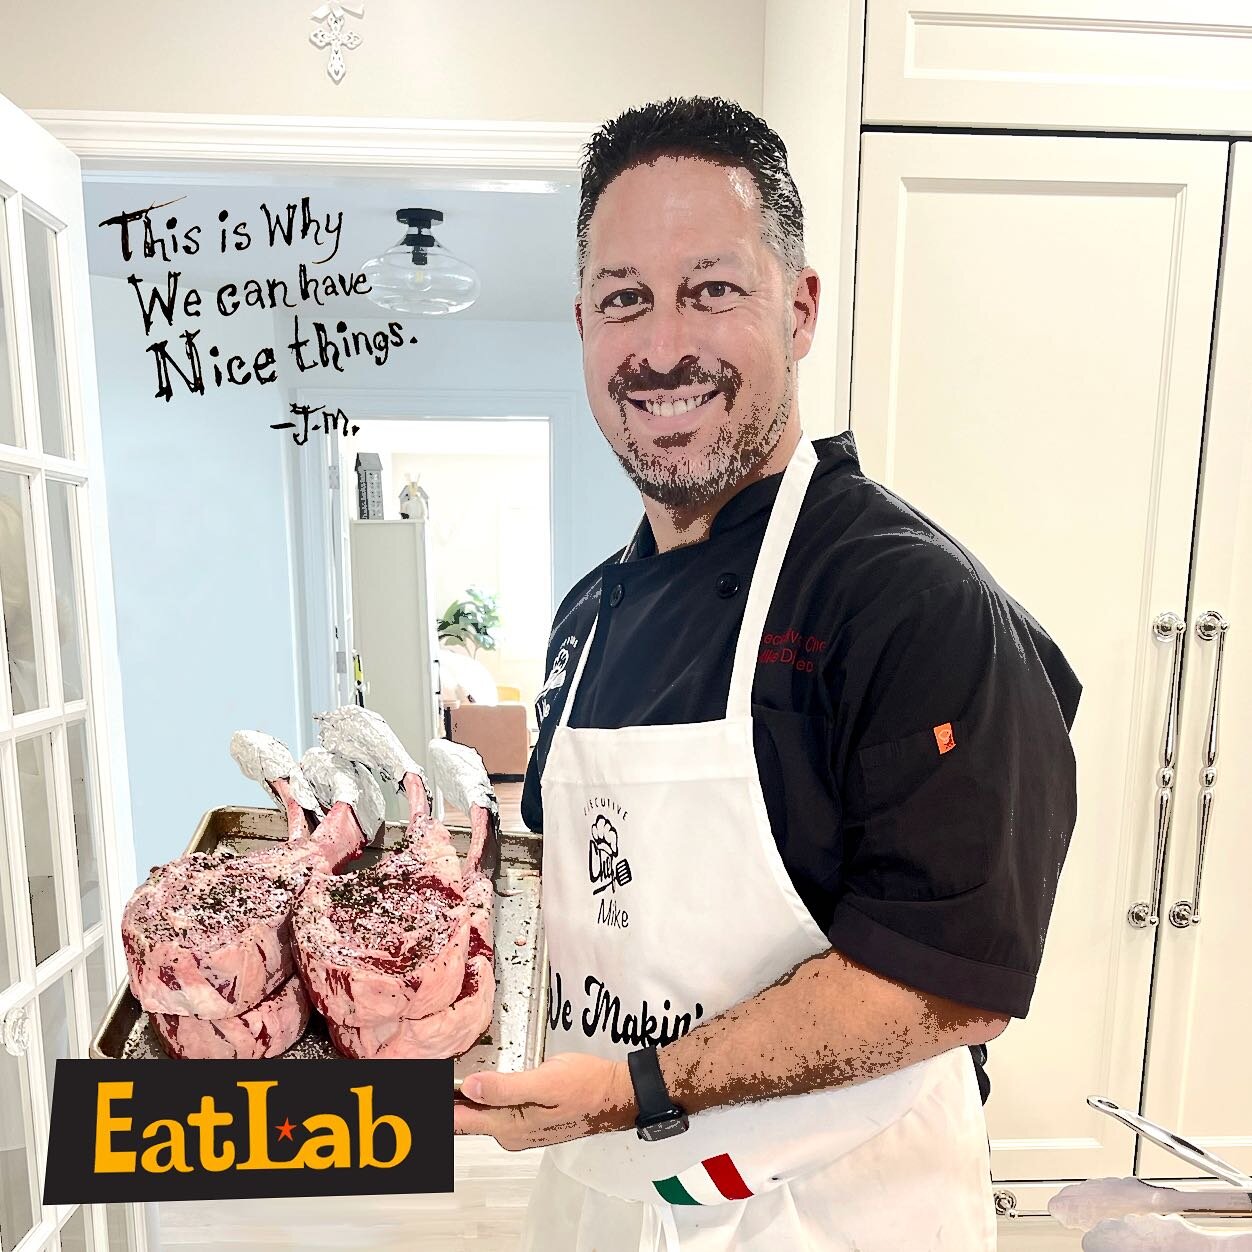 .
Executive Chef Mike DiLeo 

Consultancy :
&ndash; Love Earth Caf&eacute; &amp; Bakery, Chef Mike
 learned the ins and outs of making dairy;
 gluten; soy; and nut-free foods.

Catering :
&ndash; Deutsche Bank
&ndash; Barclays Capital

Ownership :
&n